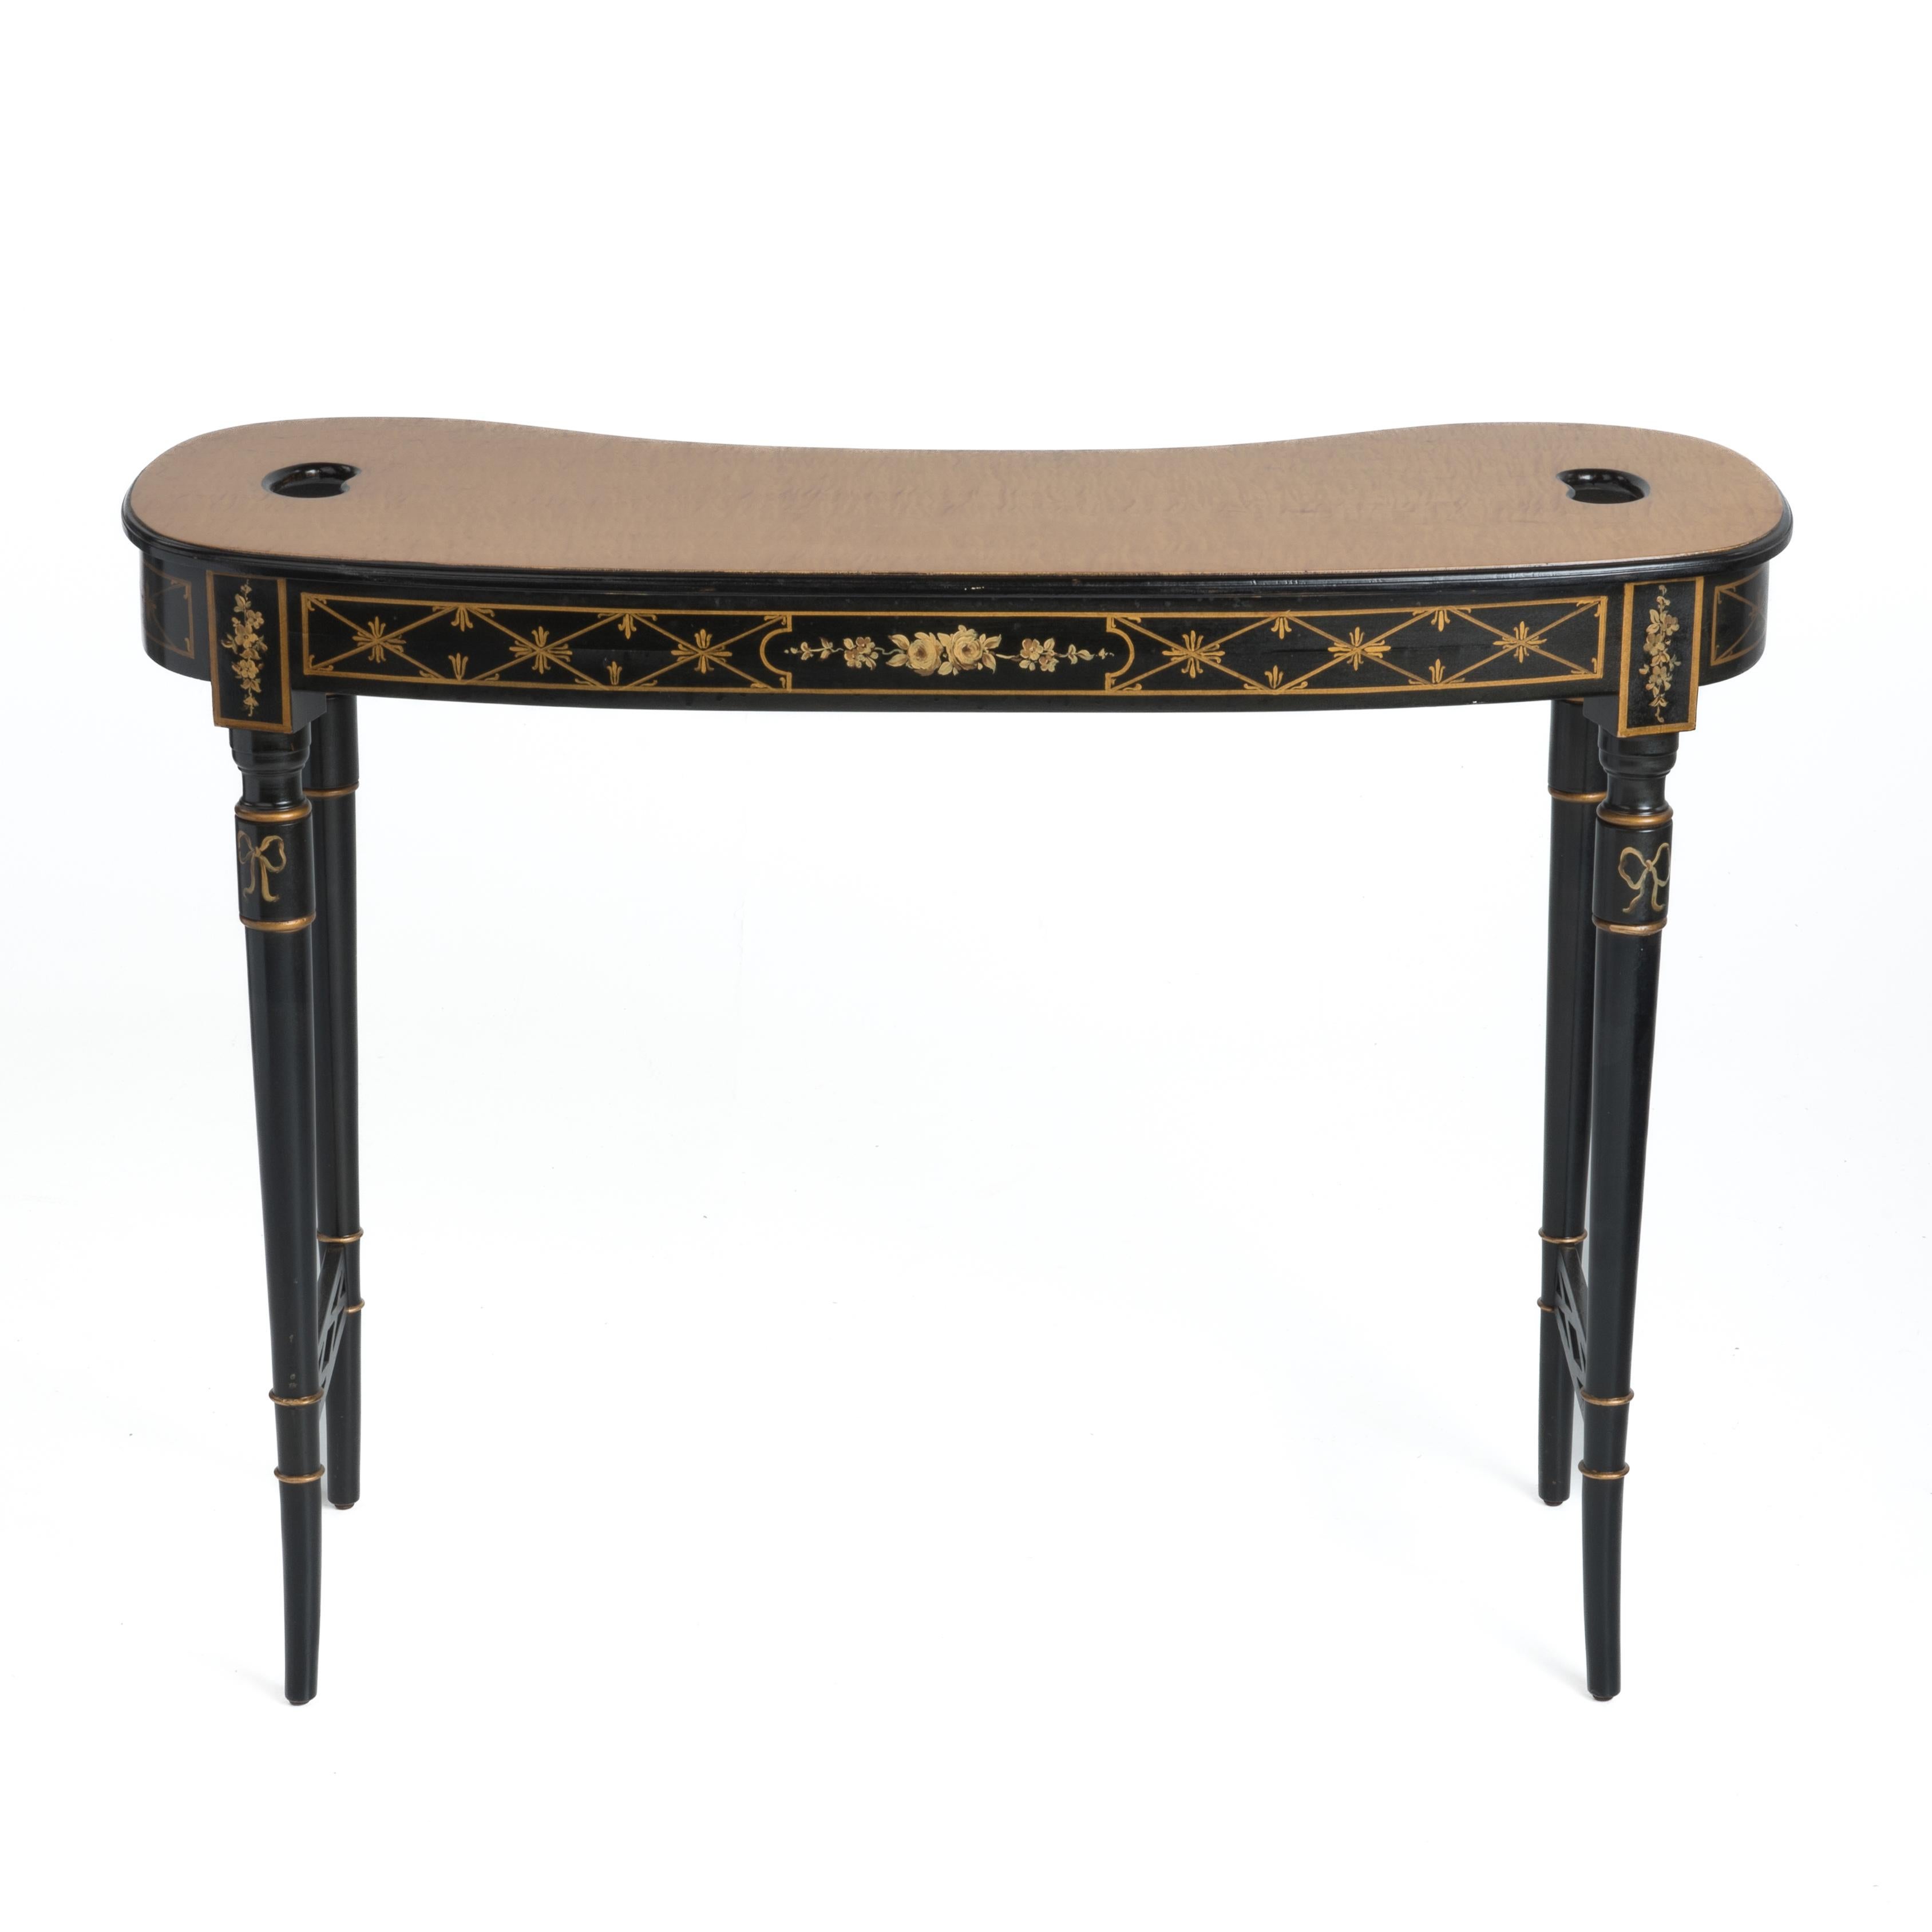 A fabulous quality antique kidney shaped writing table by Century Furniture featuring a birds eye maple top. 